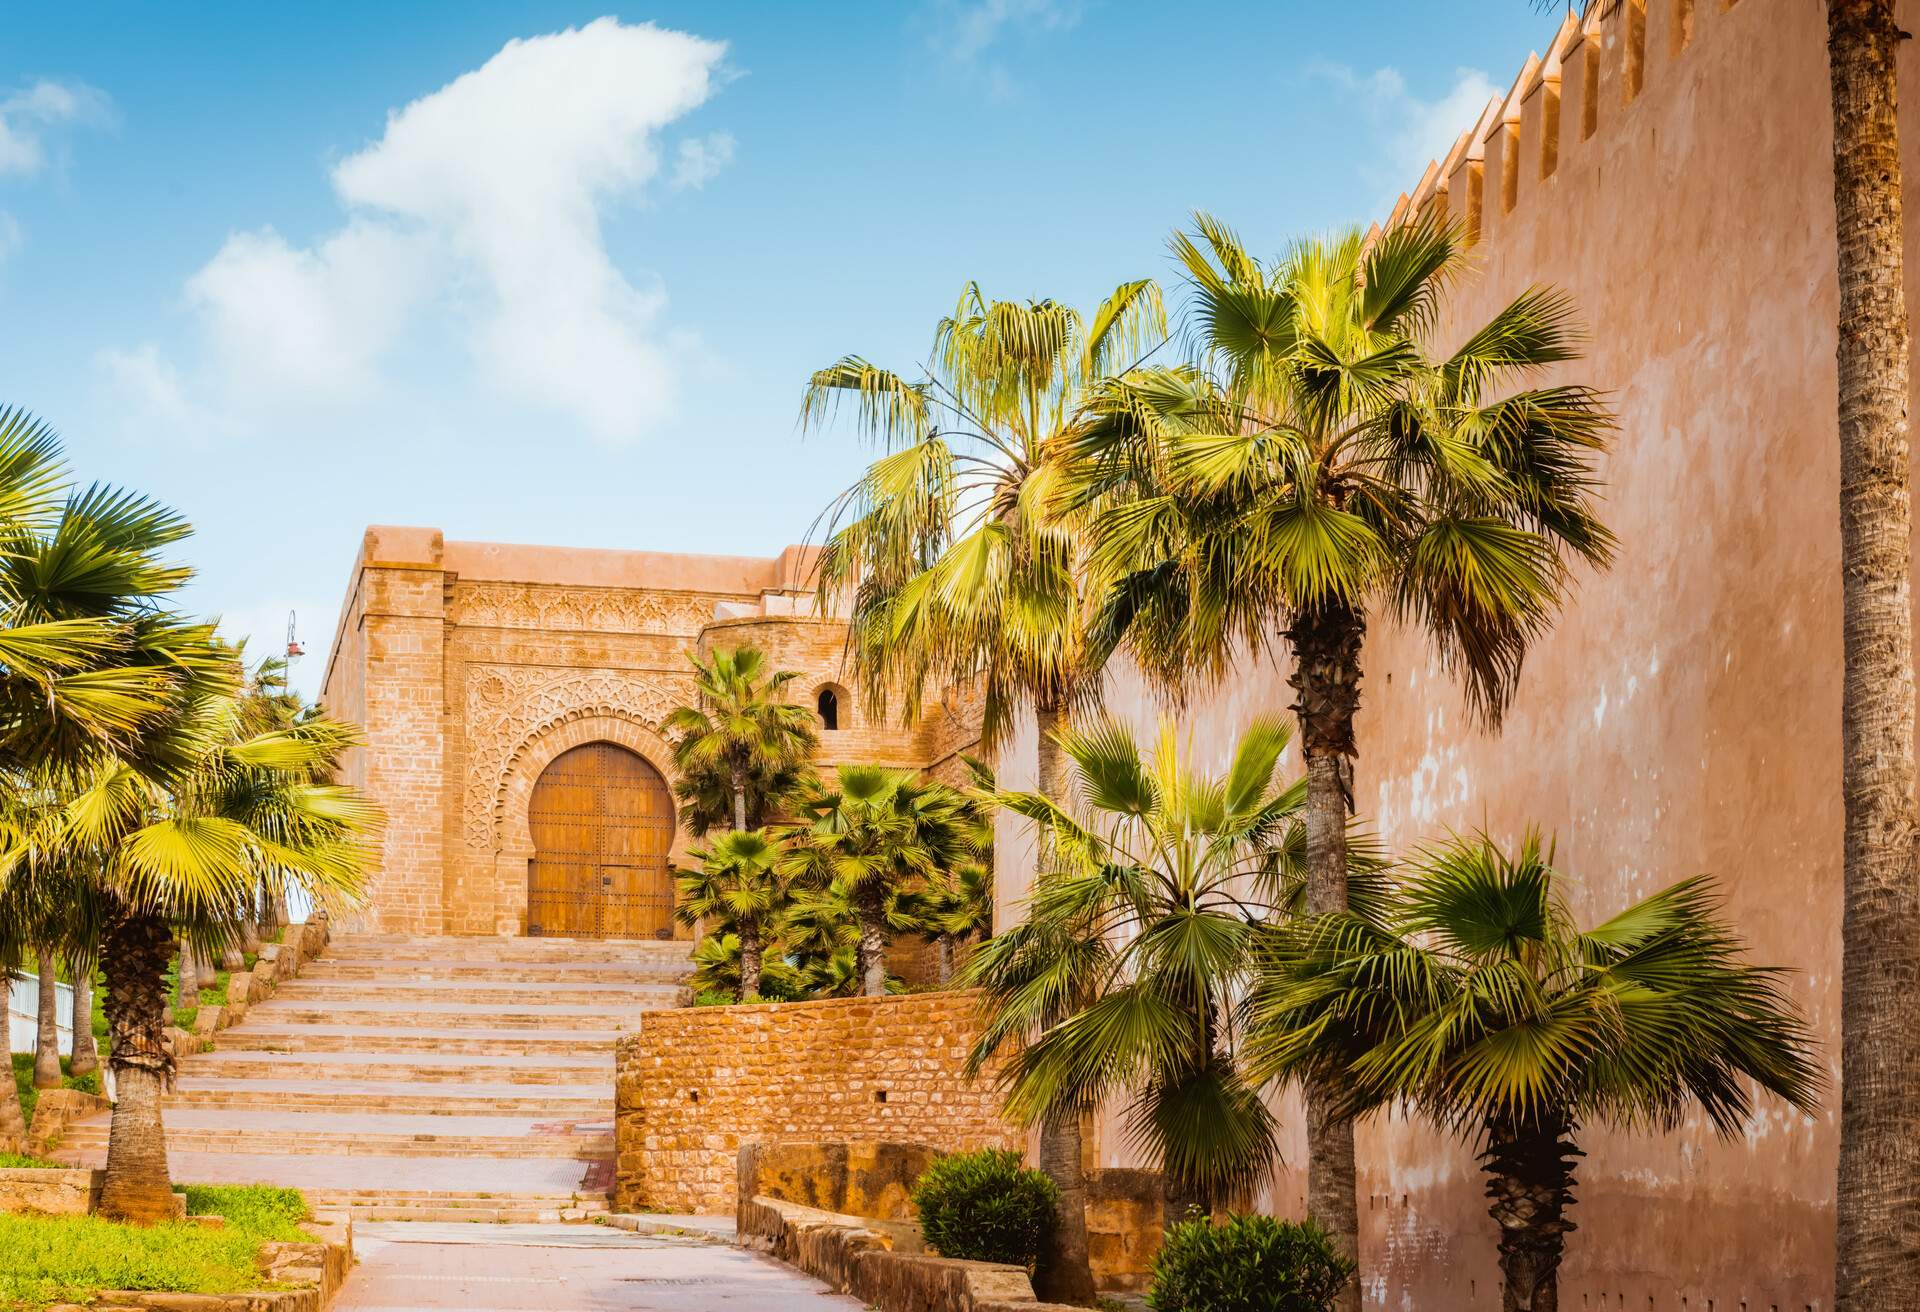 Kasbah of Udayas fortress in Rabat Morocco. Kasbah Udayas is ancient attraction of Rabat Morocco; Shutterstock ID 1117516694; SF SSA Case with Manager Approval: SF6759285; Job: ; Client/Licensee: ; Other: